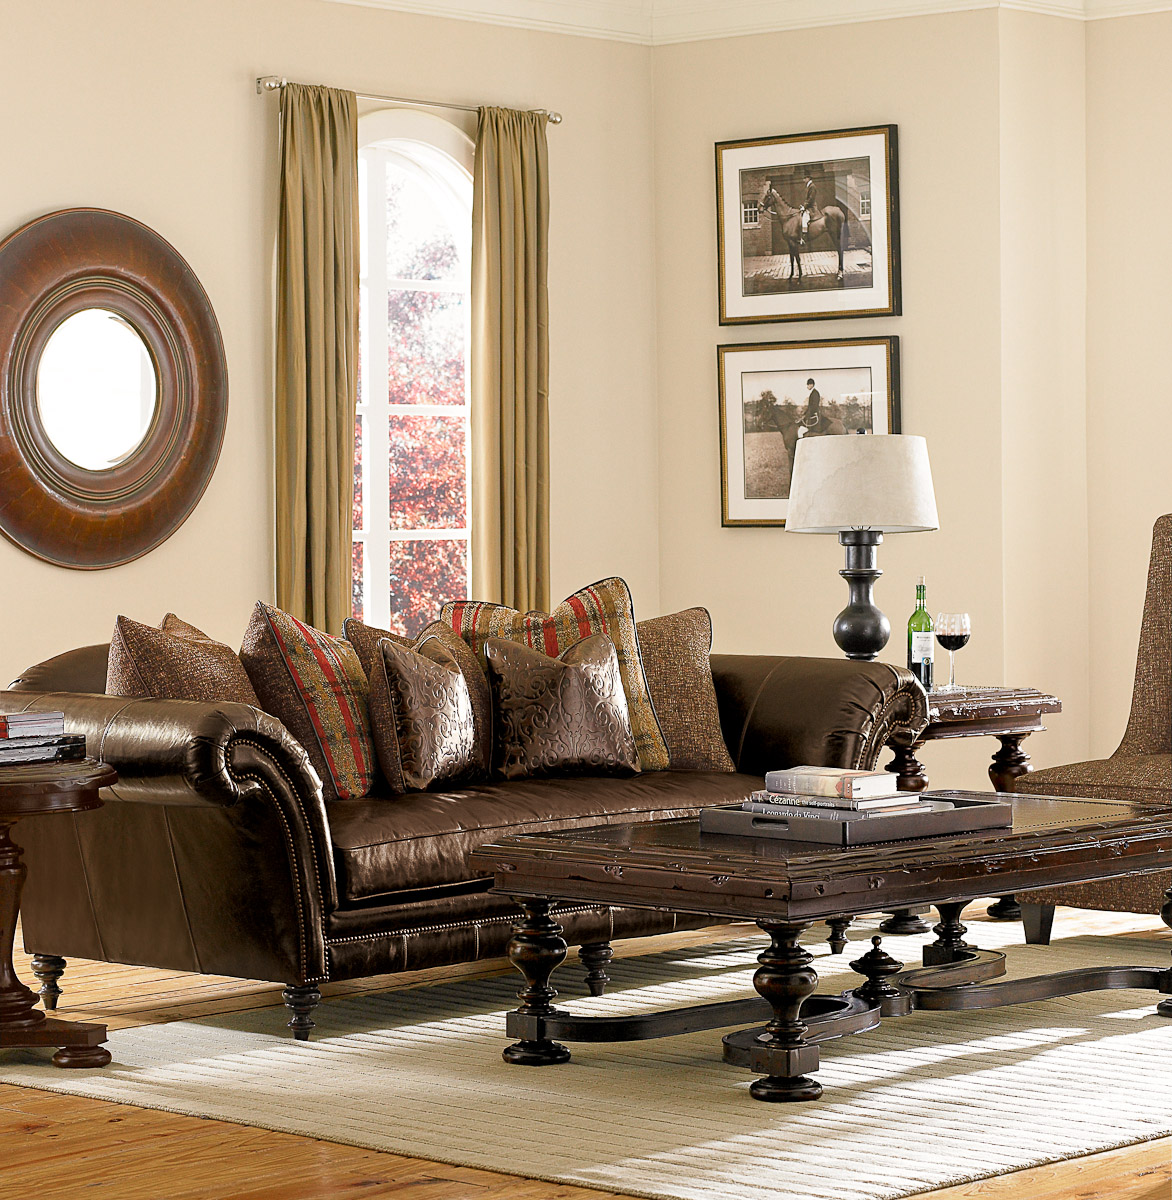 Living Room with Leather Furniture